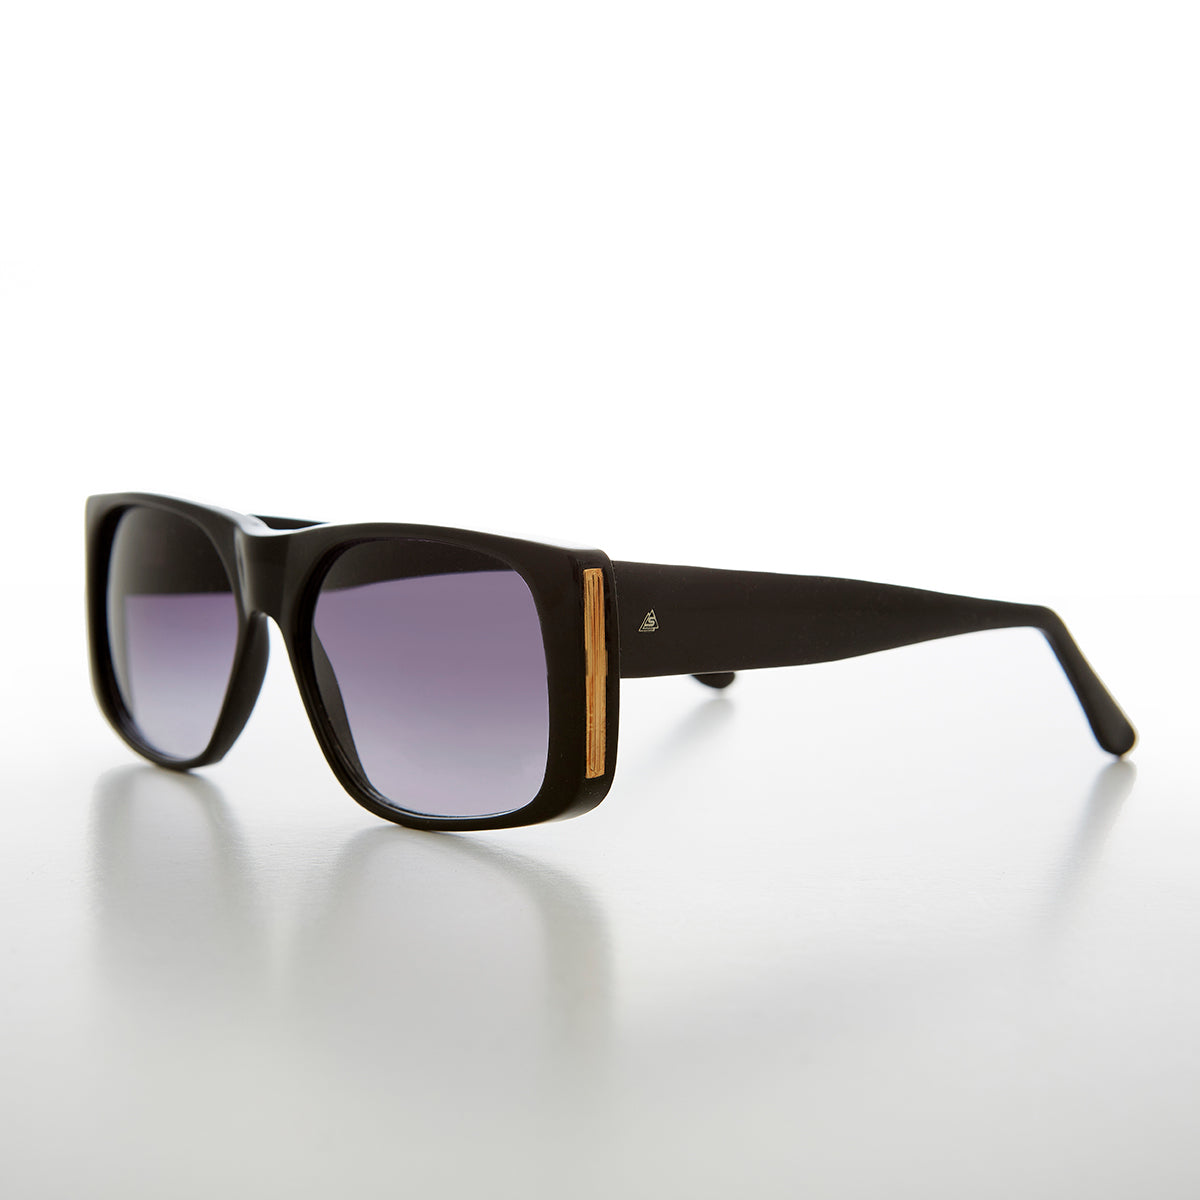 Square Block Sunglass with Gold Rim Accents 80s